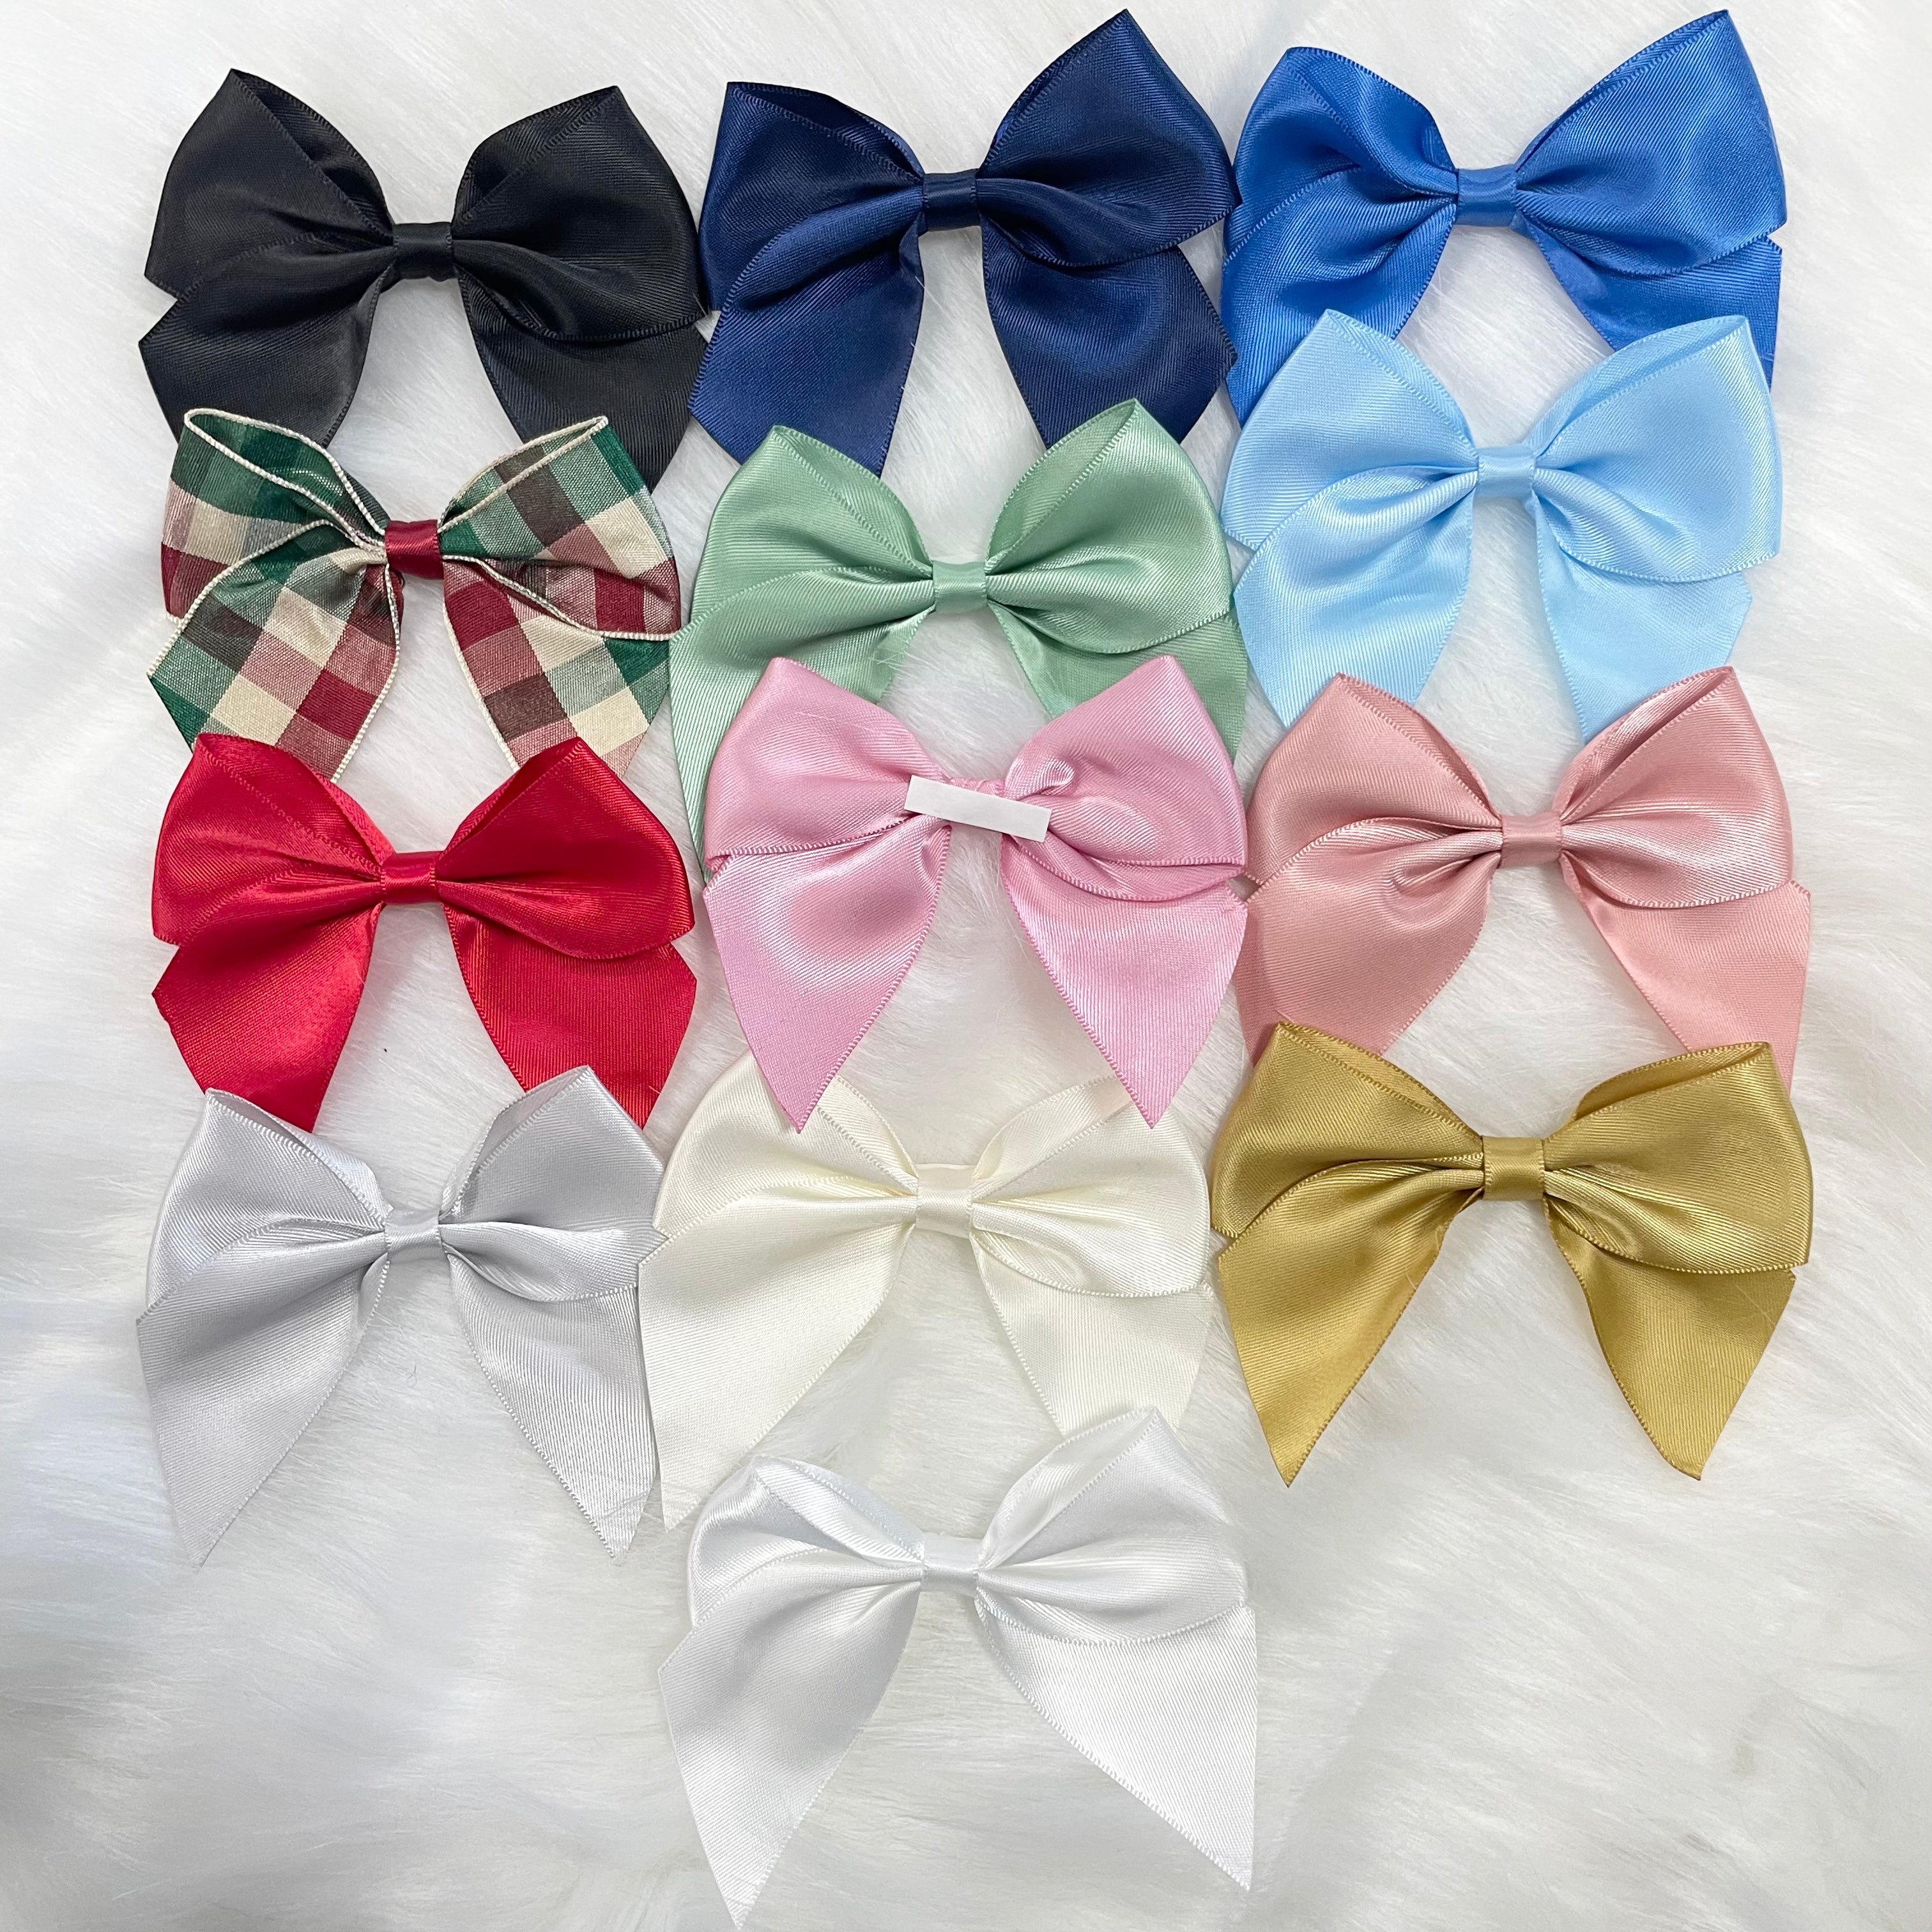 PACK OF 6 ITALIAN SATIN BOWS WITH ADHESIVE TAB